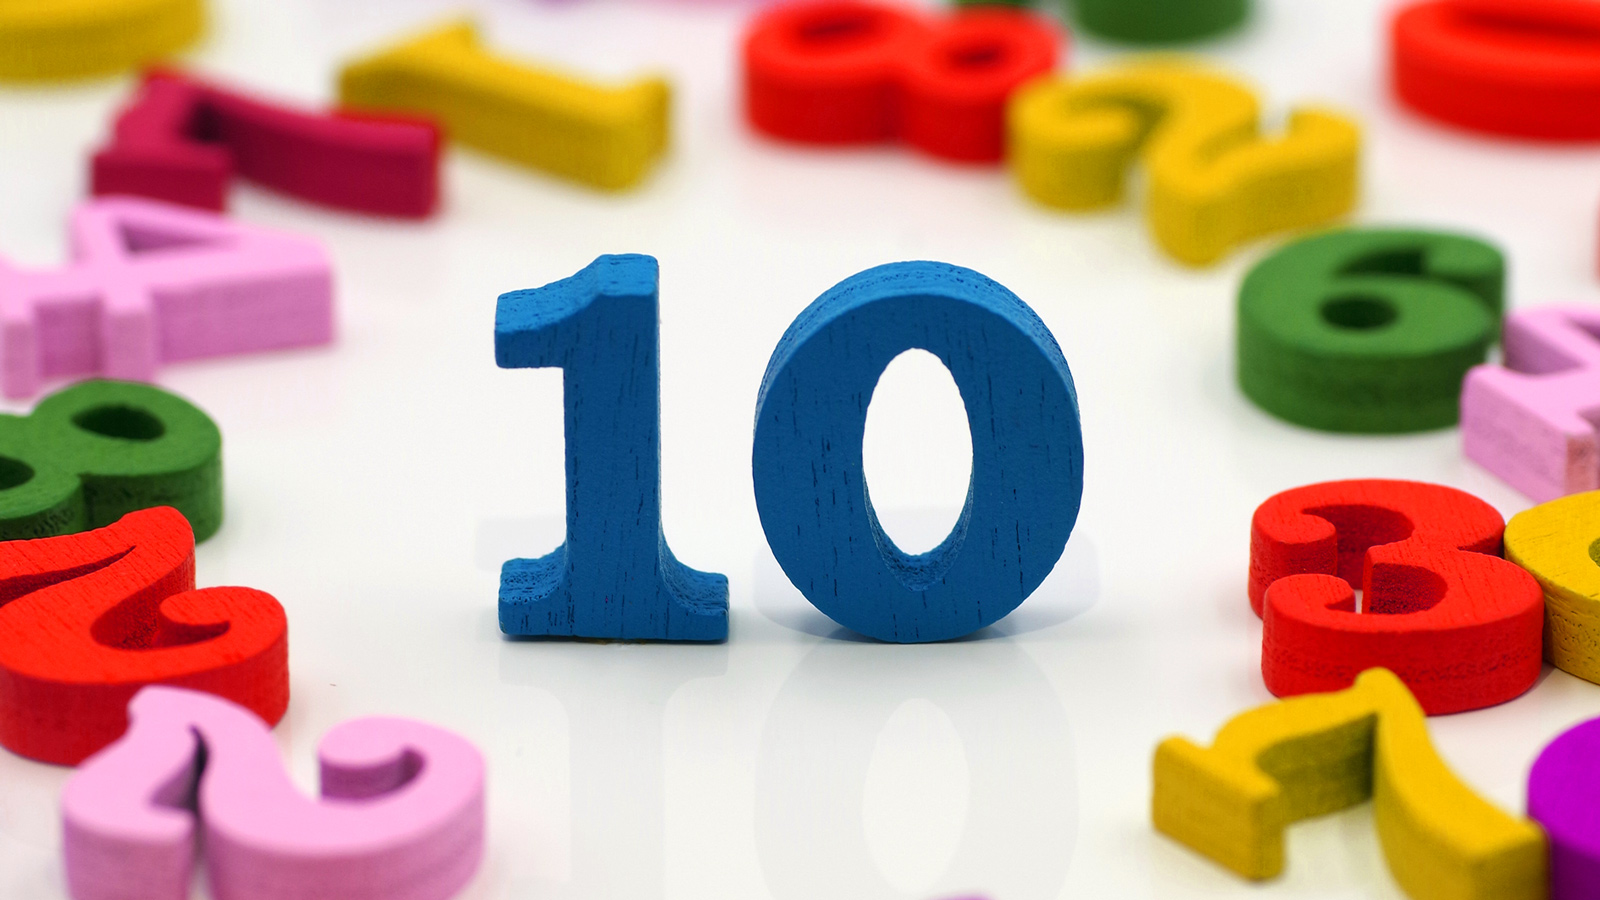 Colorful Wooden Blocks "10"